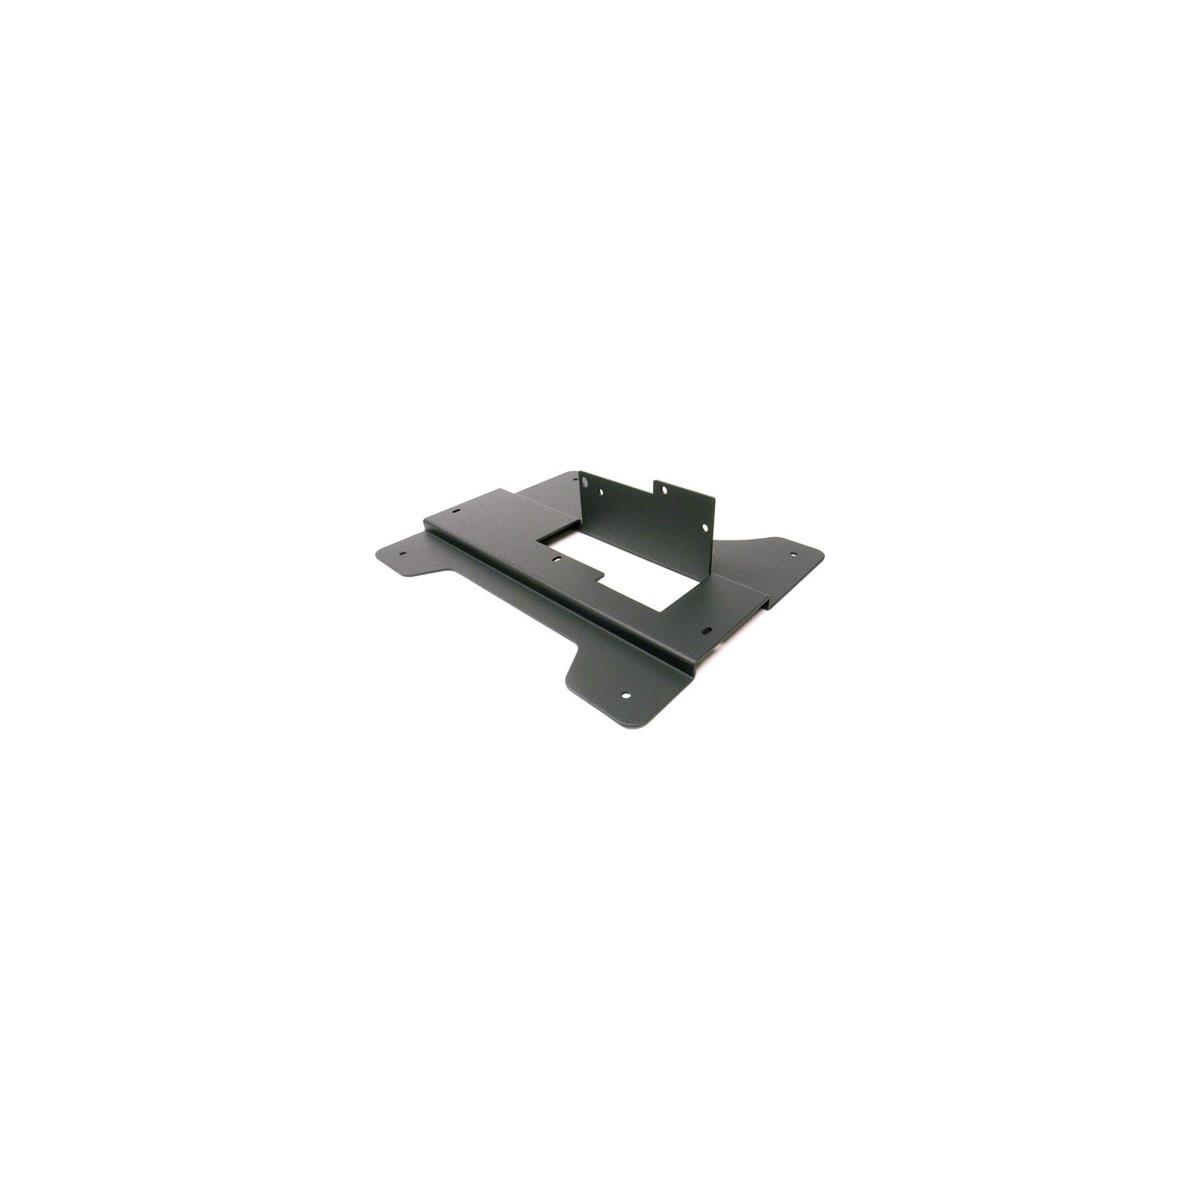 Image of Ikegami STD-1517 Stand for HLM-1704WR/1711WR/1510R LCD Monitors